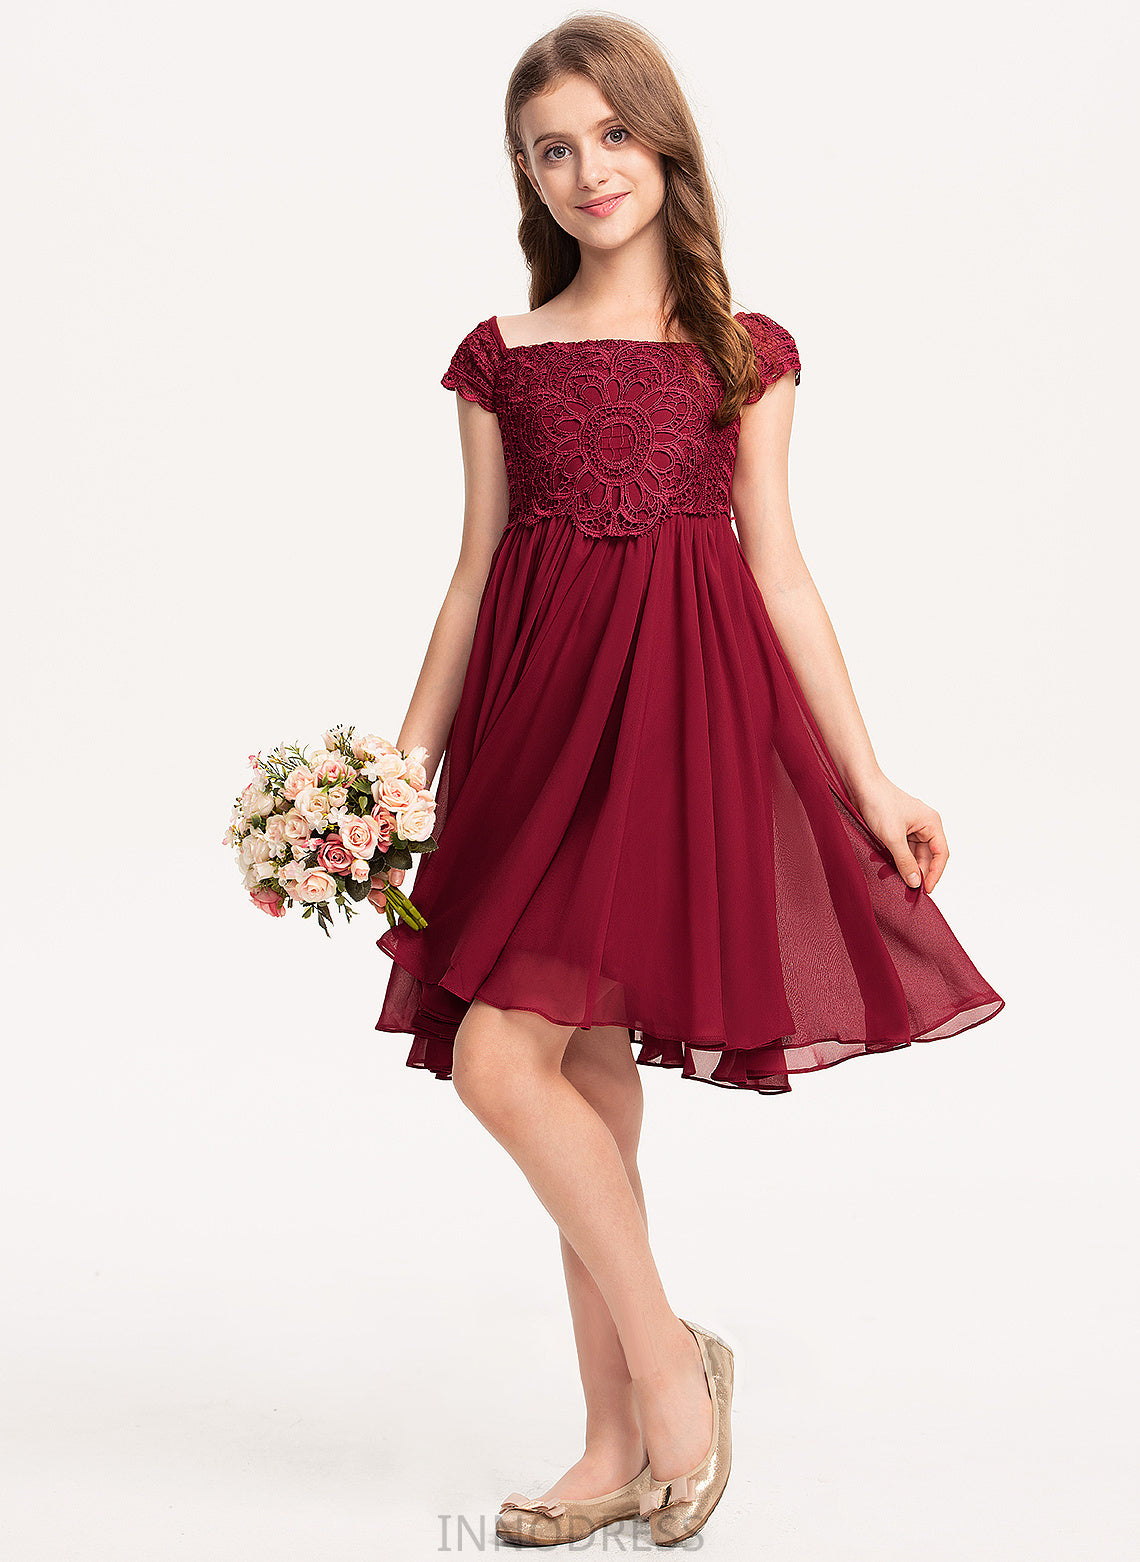 With Off-the-Shoulder Junior Bridesmaid Dresses Madalyn A-Line Chiffon Bow(s) Knee-Length Lace